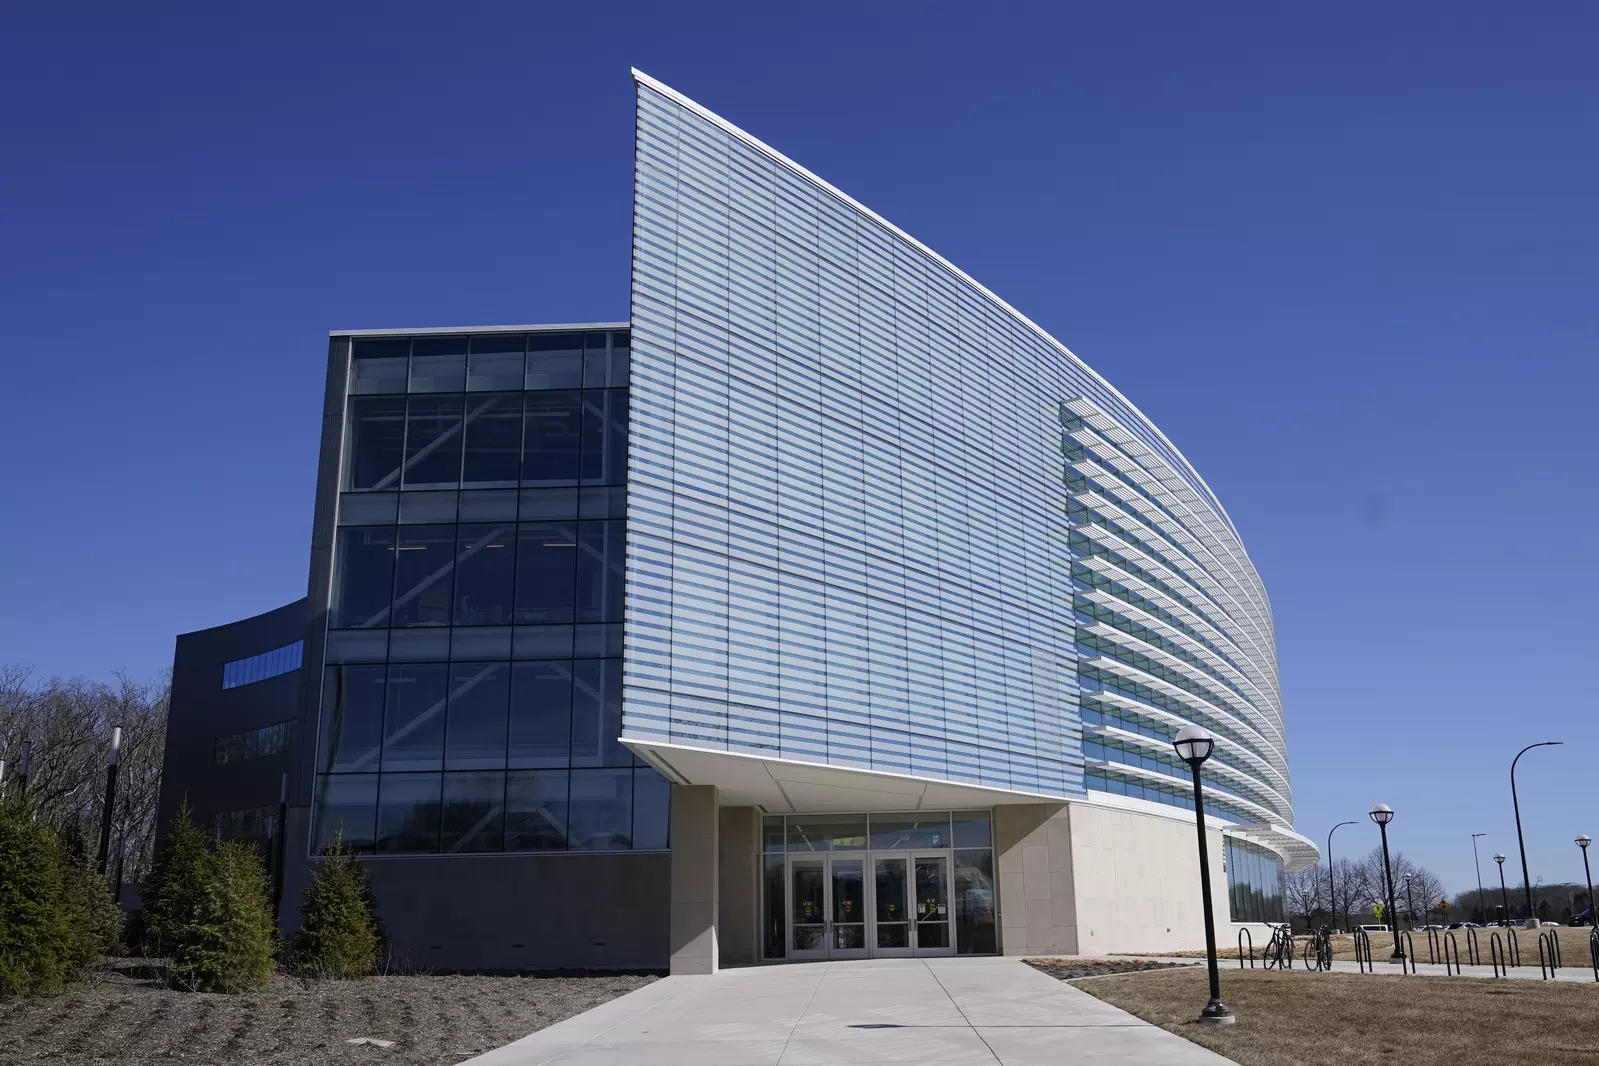 Ford contributed about $37 million to the cost of the robotics building which also features a three-story, indoor fly zone to test drones and other autonomous aerial vehicles indoors; a yard designed with input from scientists at the university and NASA to test vehicles and landing concepts on a landscape mimicking the surface of Mars.